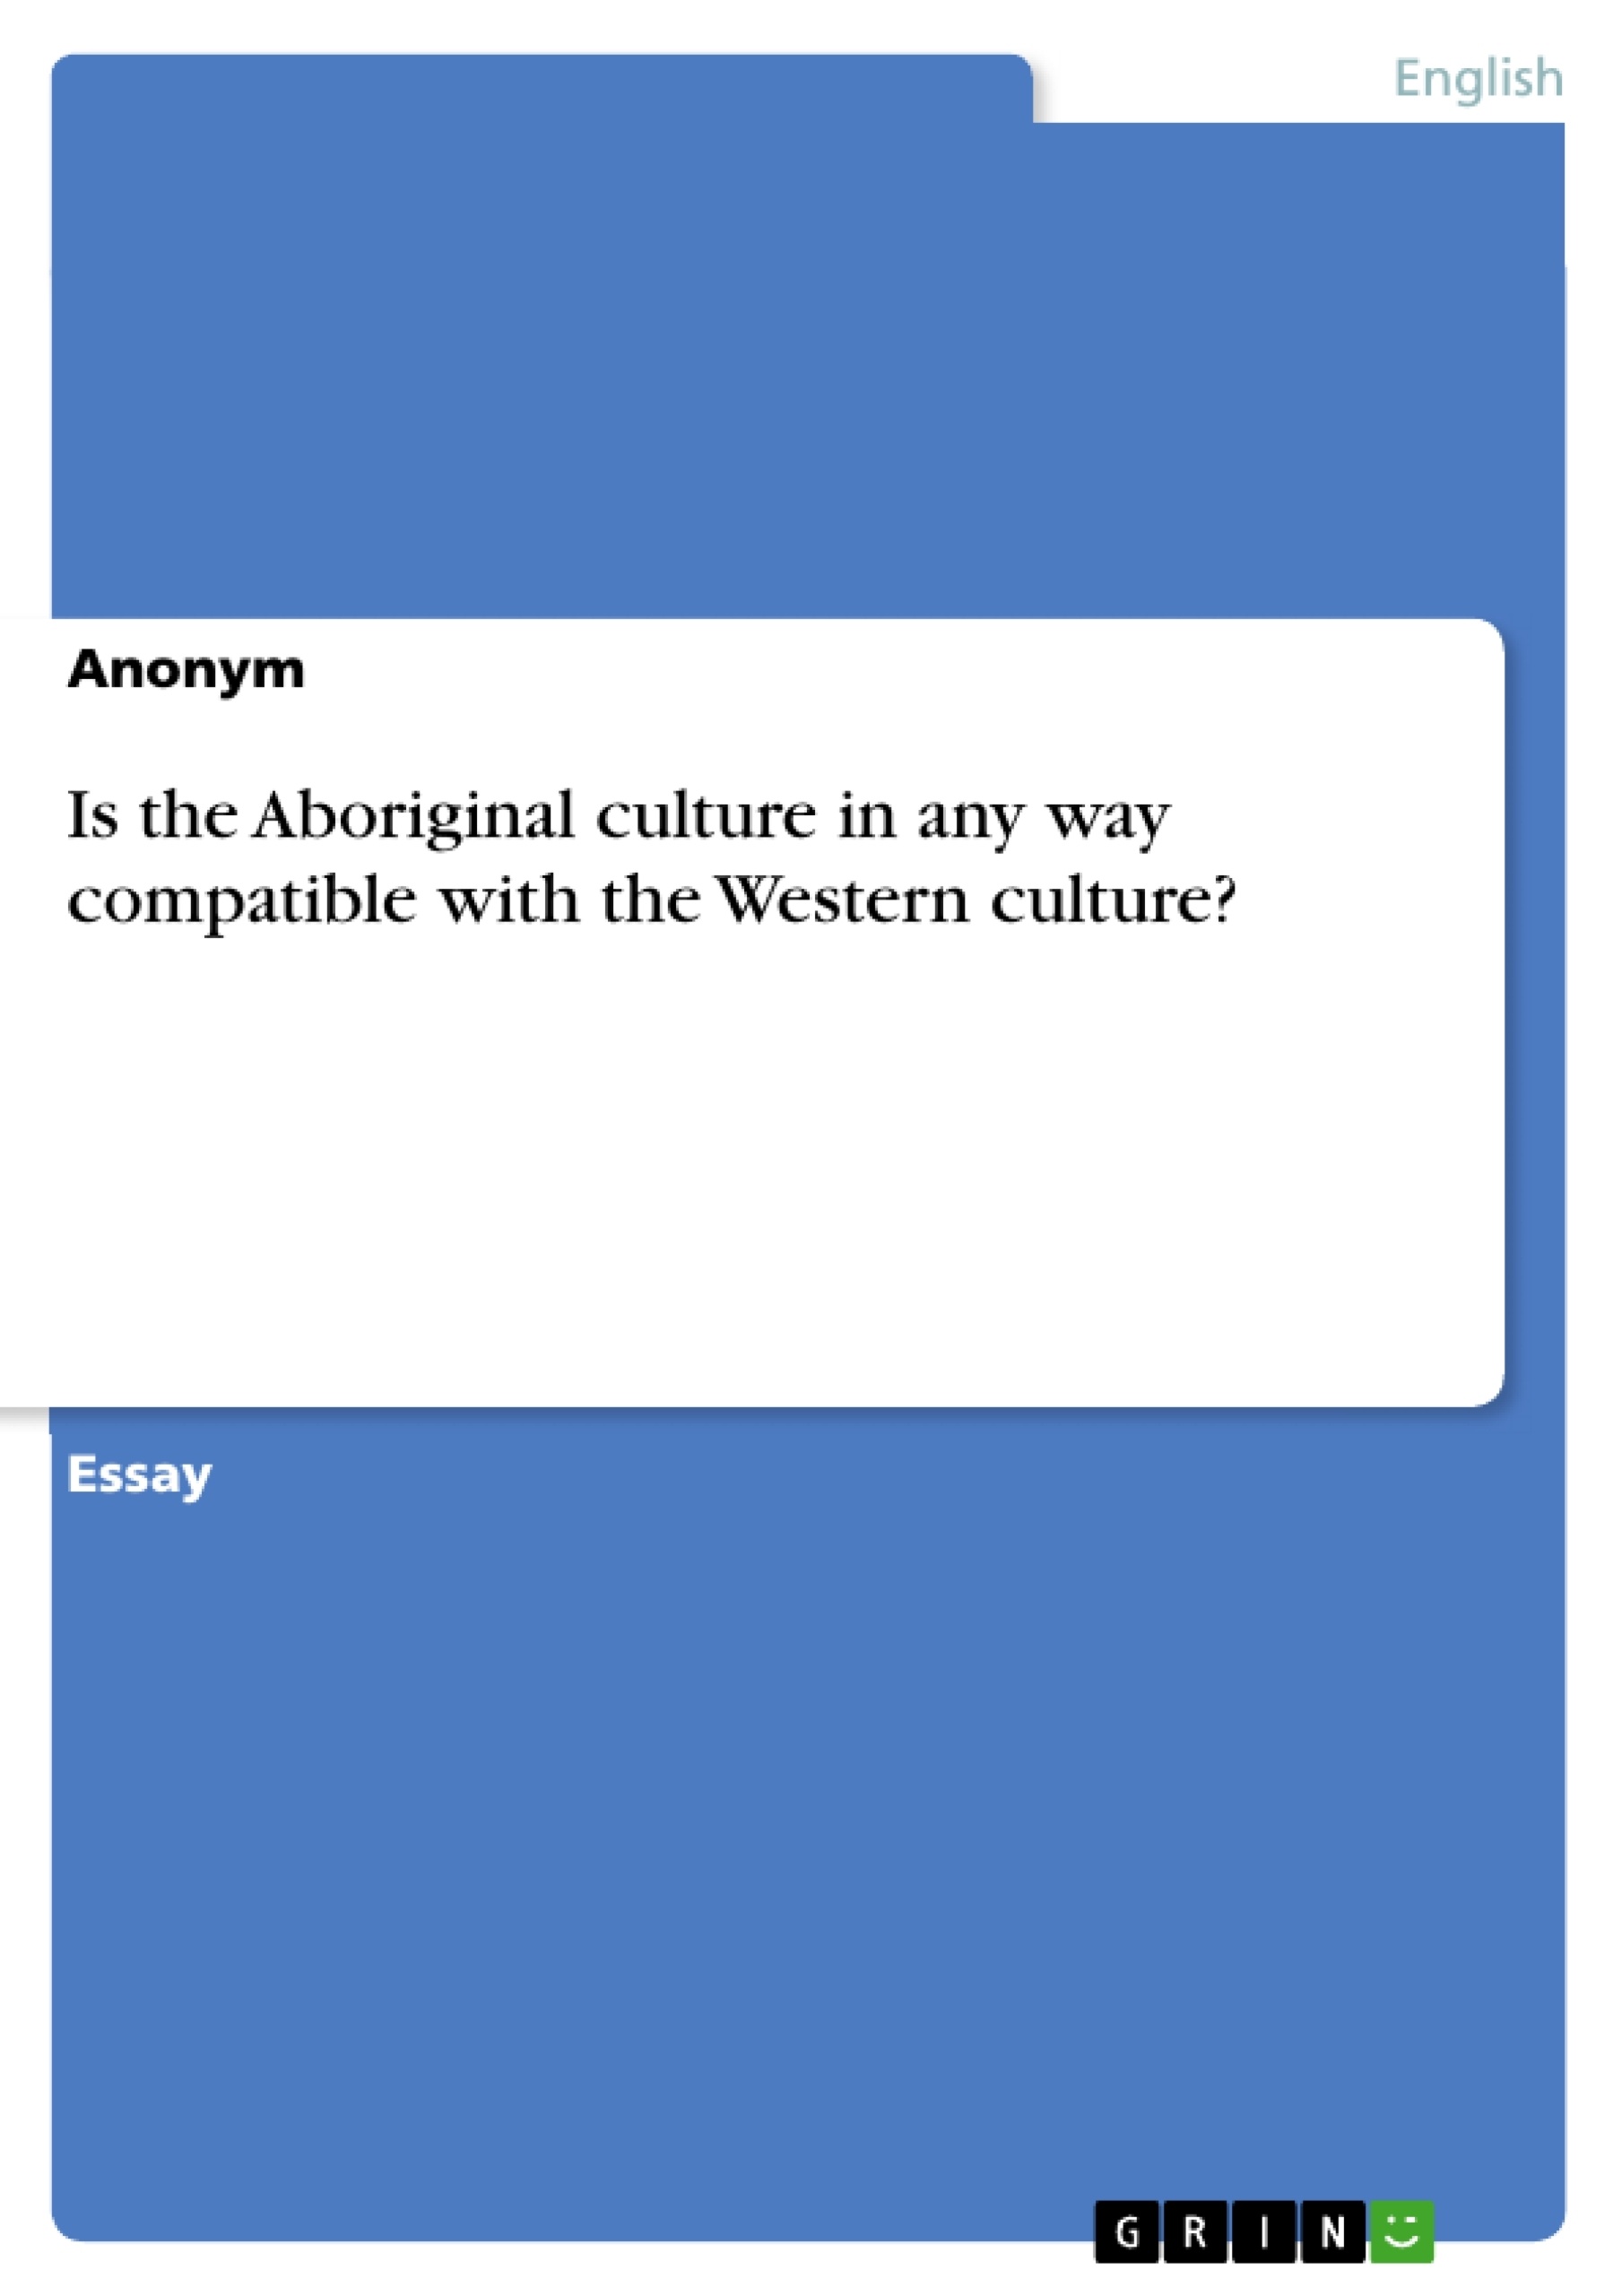 Title: Is the Aboriginal culture in any way compatible with the Western culture?